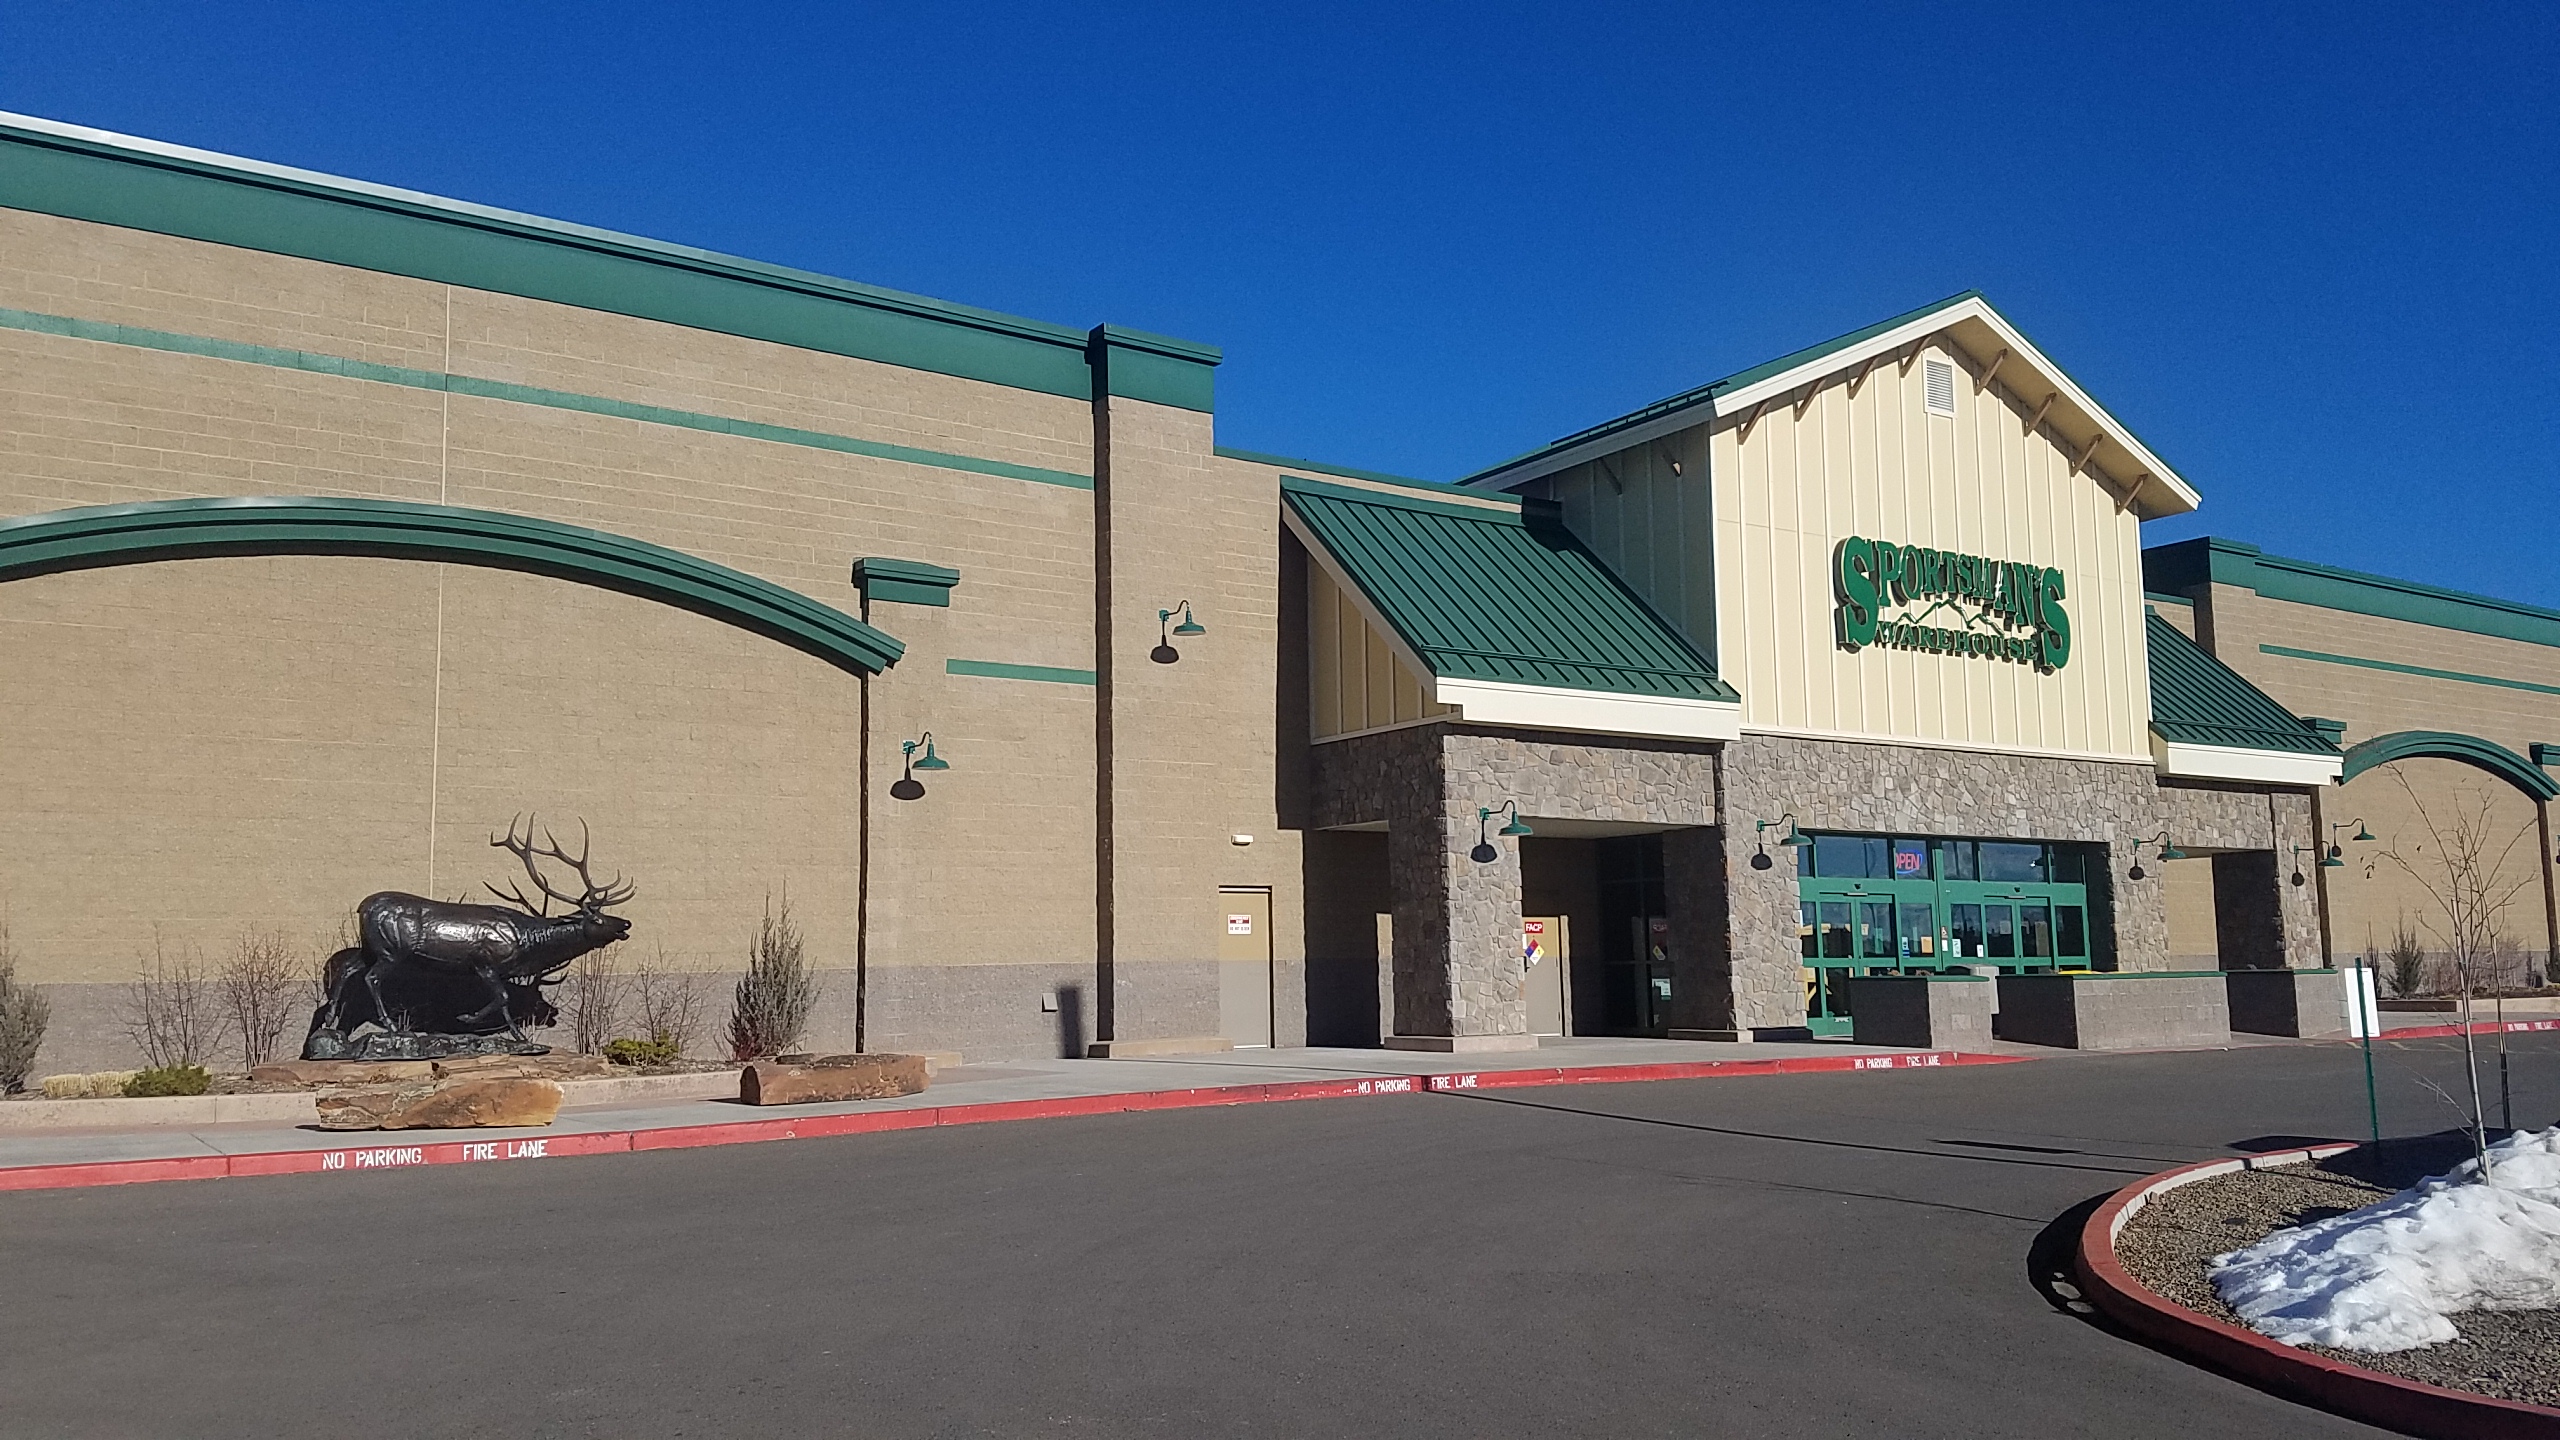 Check out Sportsman's Warehouse in Flagstaff for outdoor equipment, gear, classes, and more!